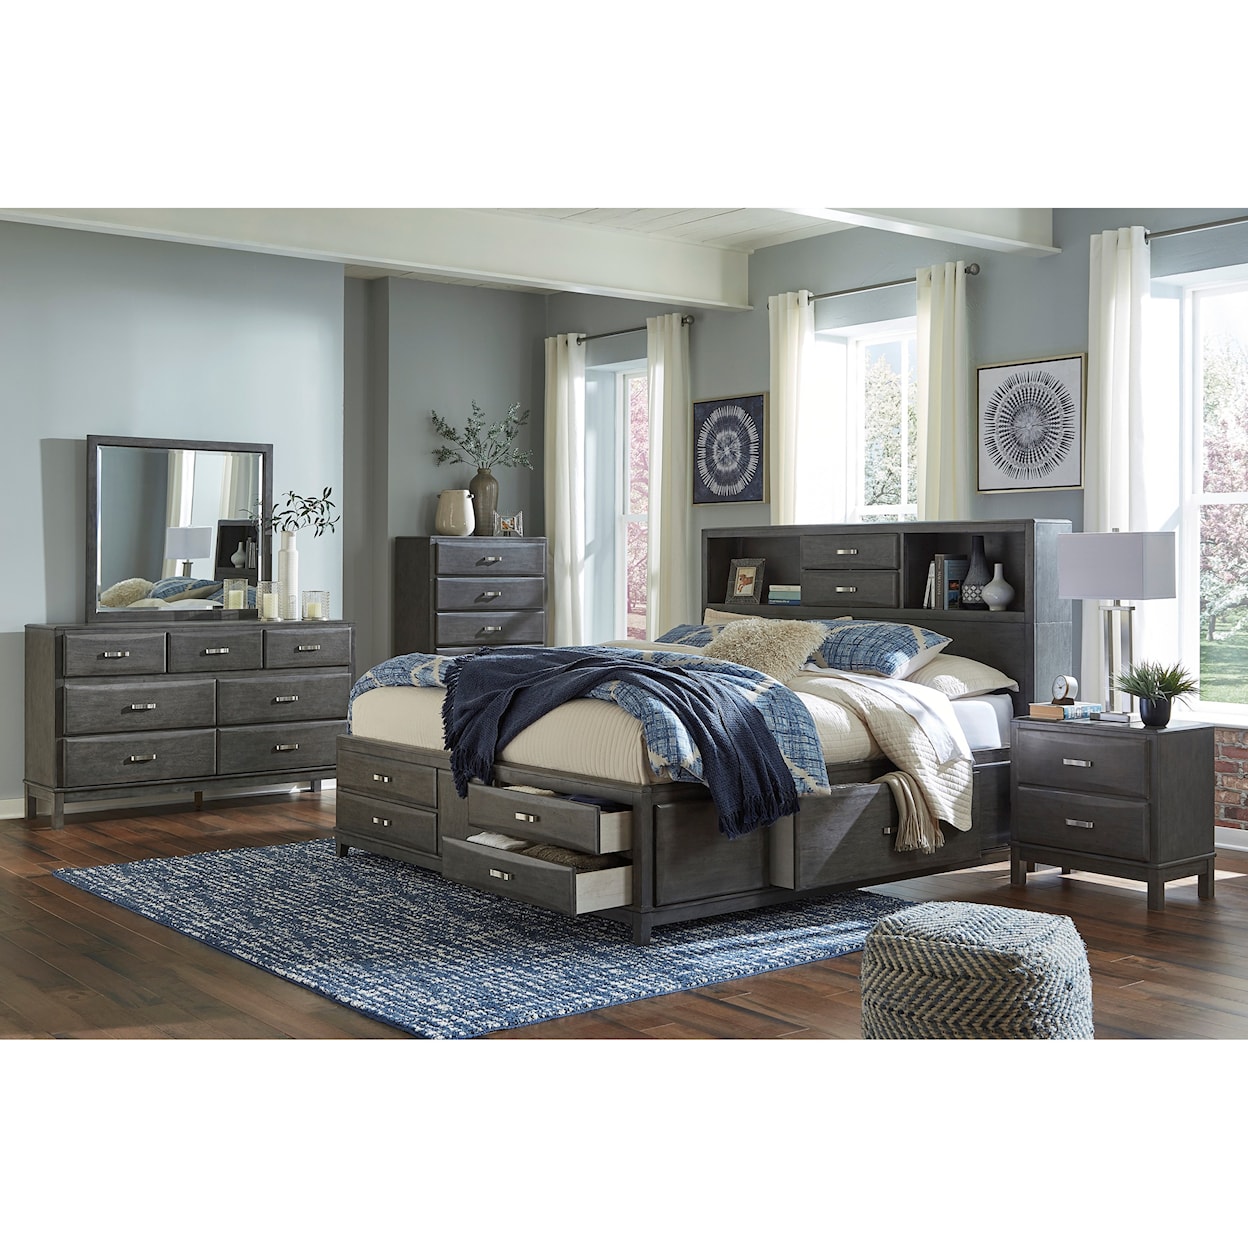 Signature Design by Ashley Furniture Caitbrook King Storage Bed with 8 Drawers